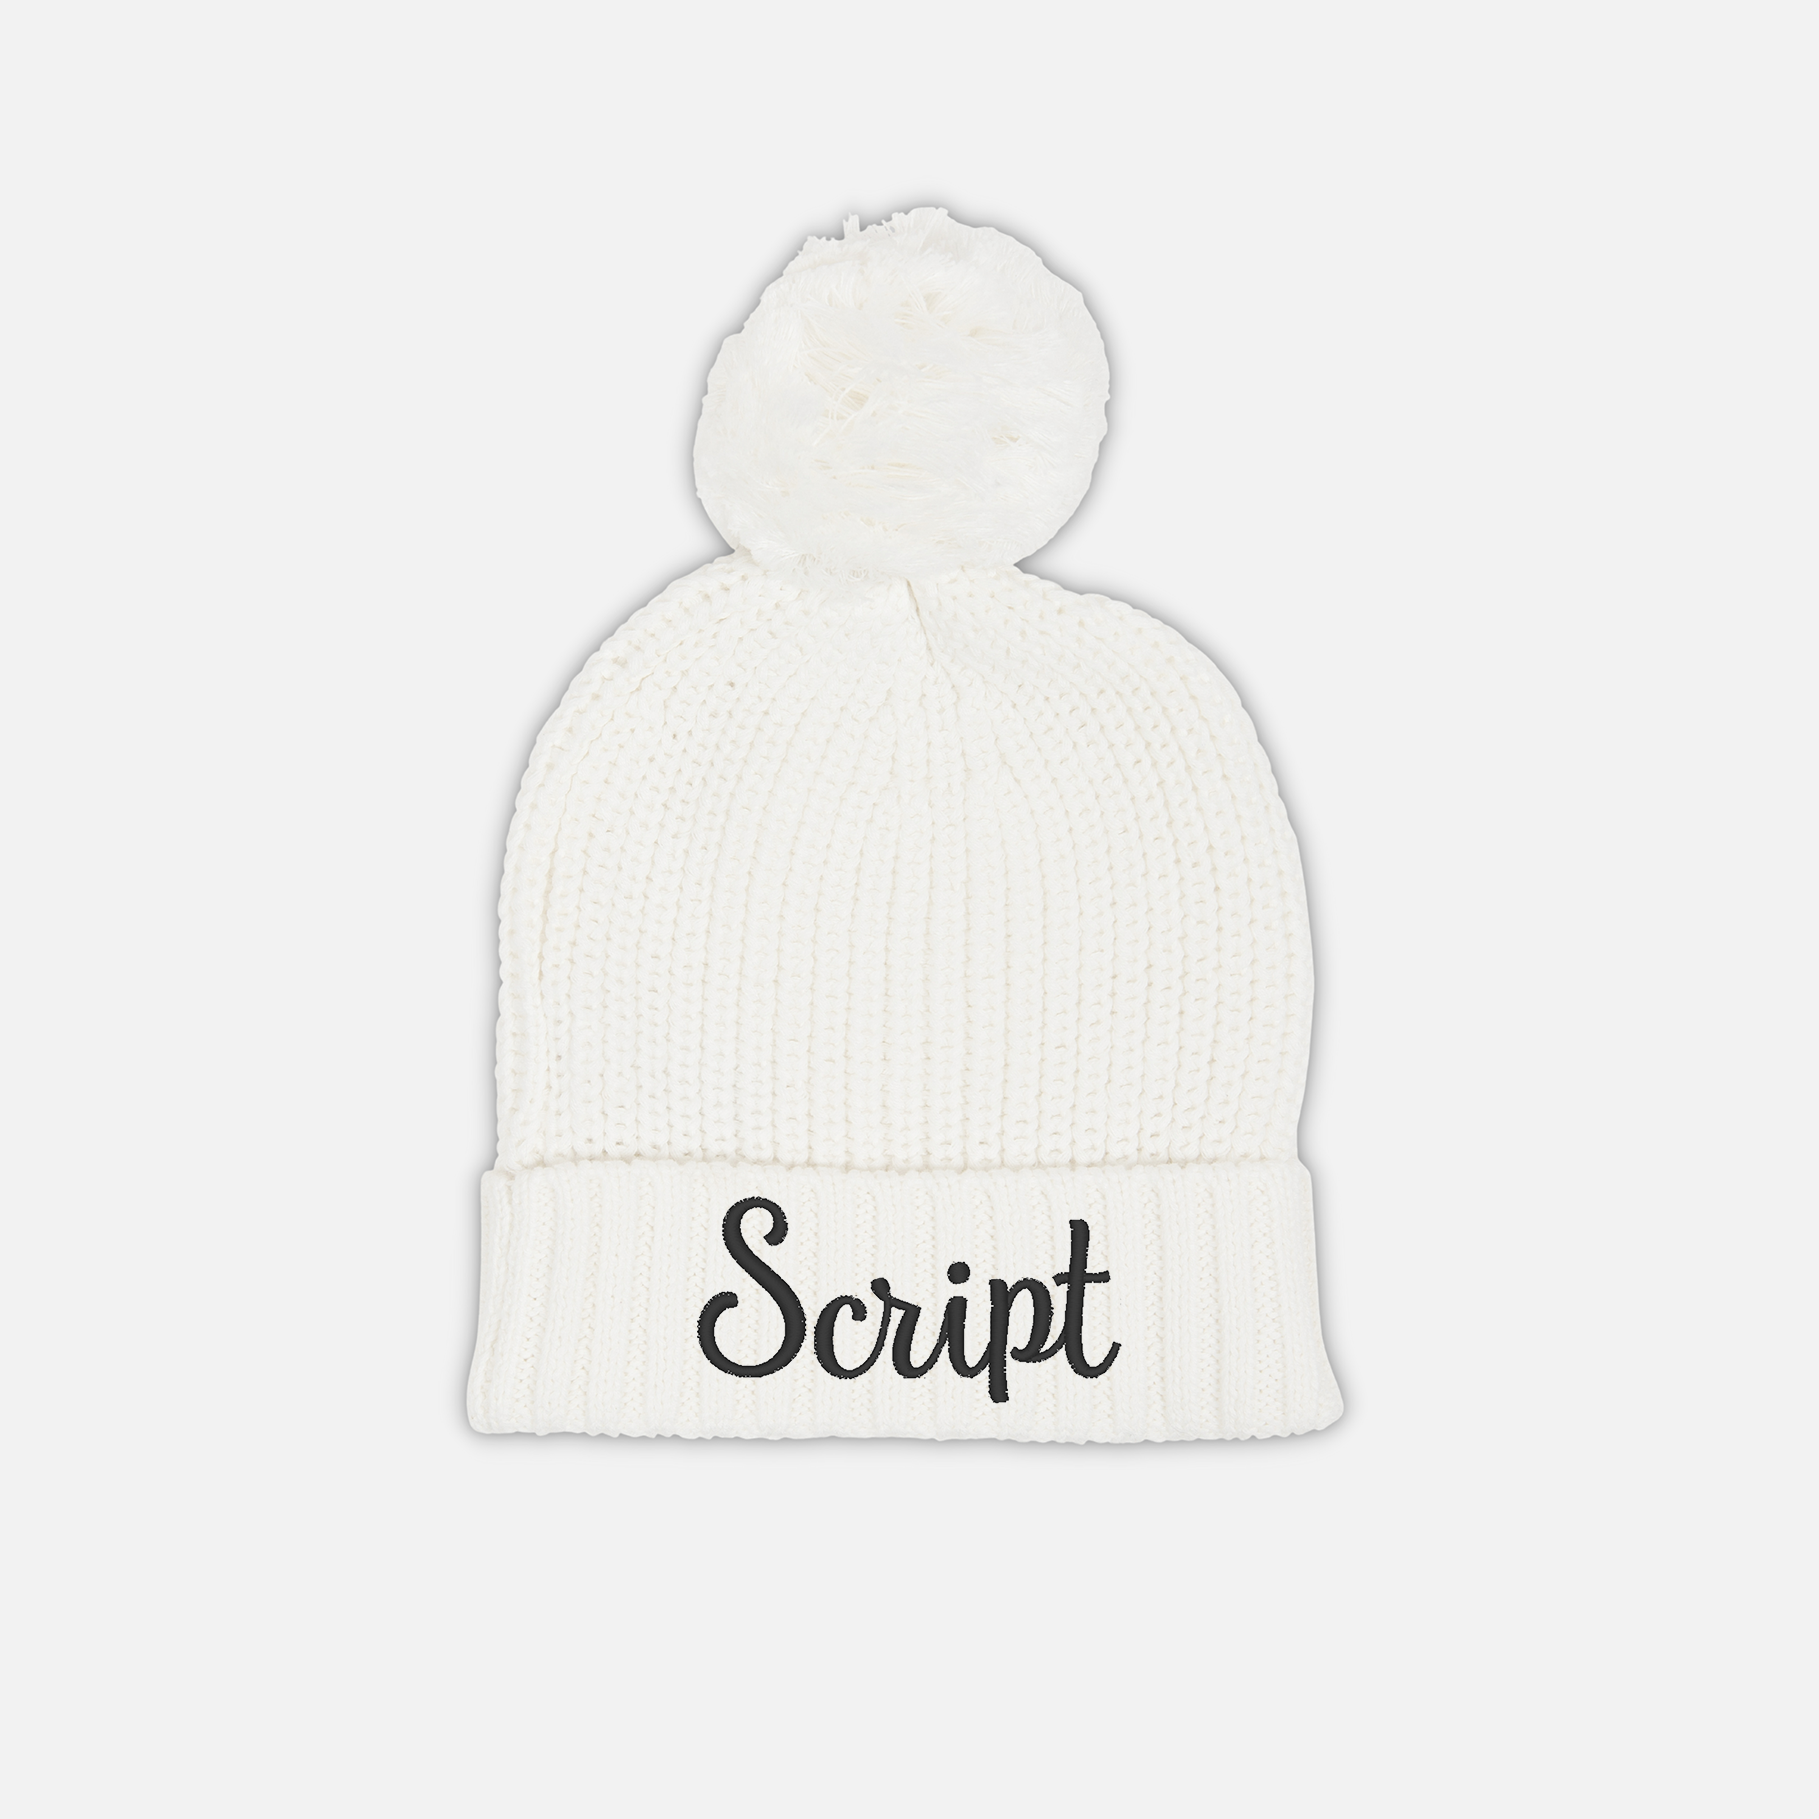 Embroidered Chunky Knit Beanie - Marshmallow